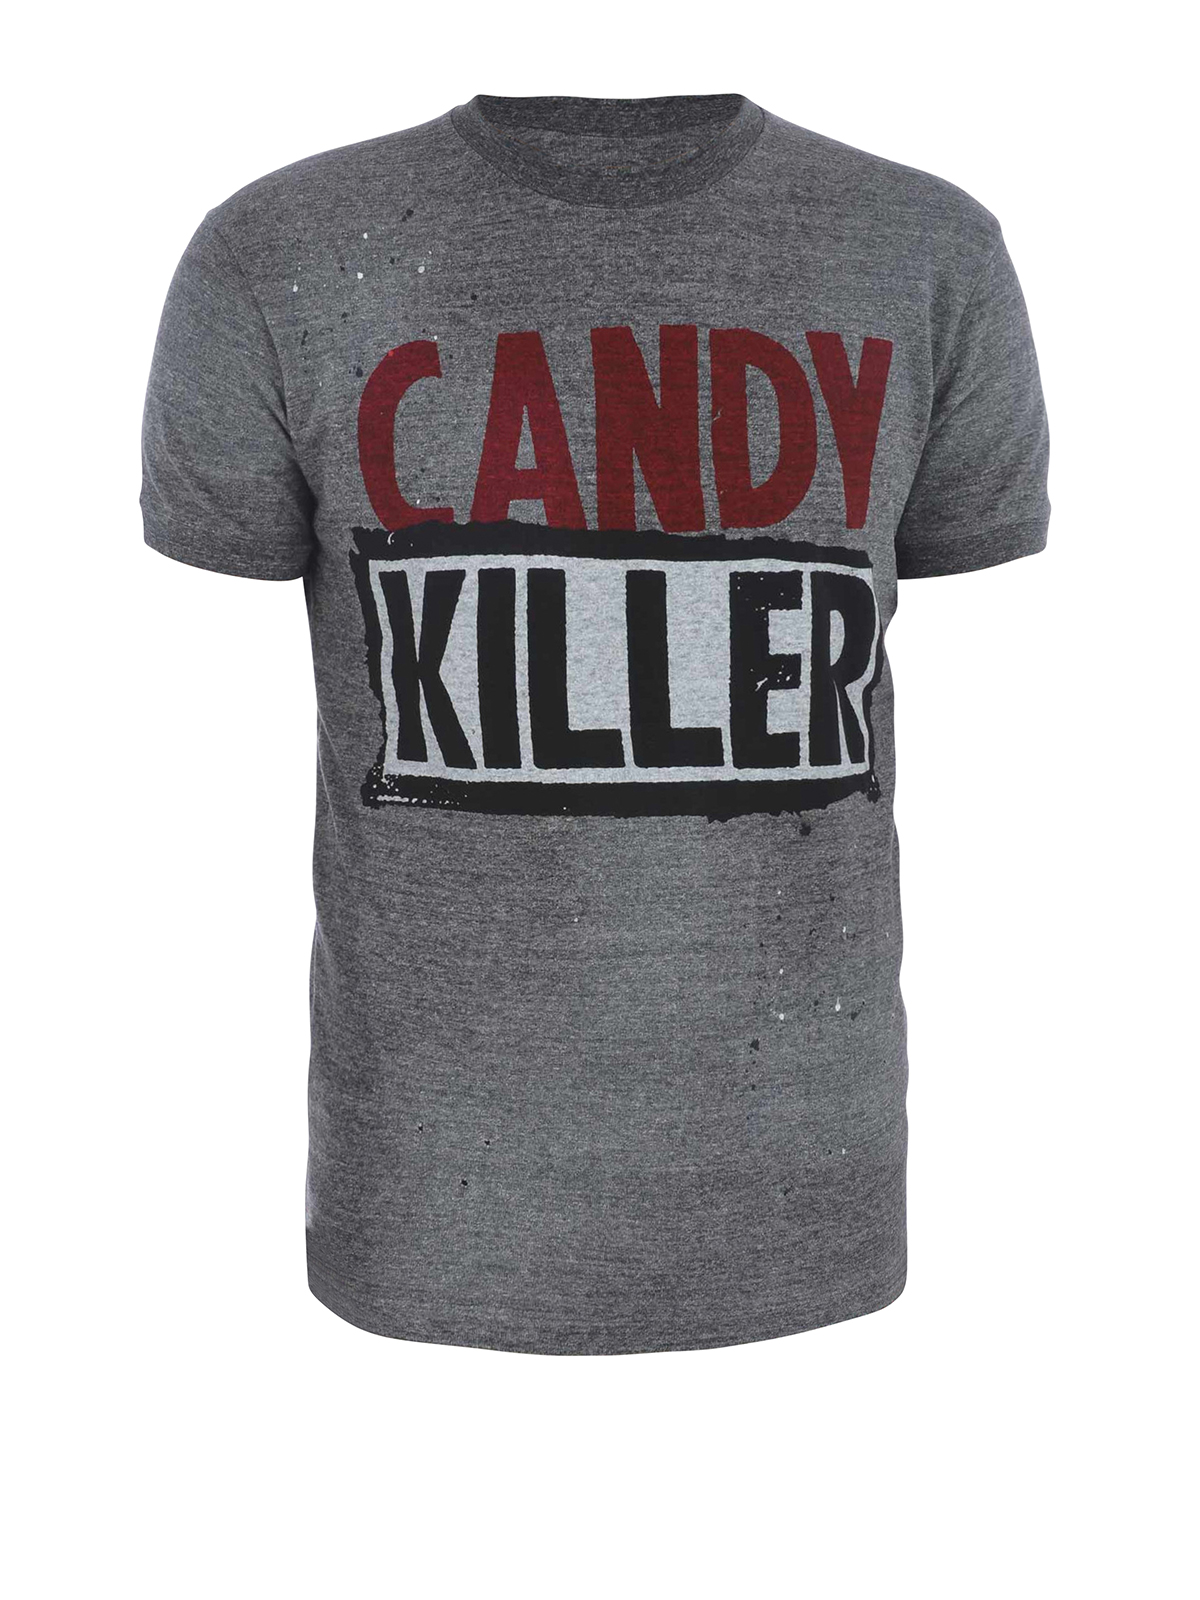 tee shirt dsquared2 candy killer